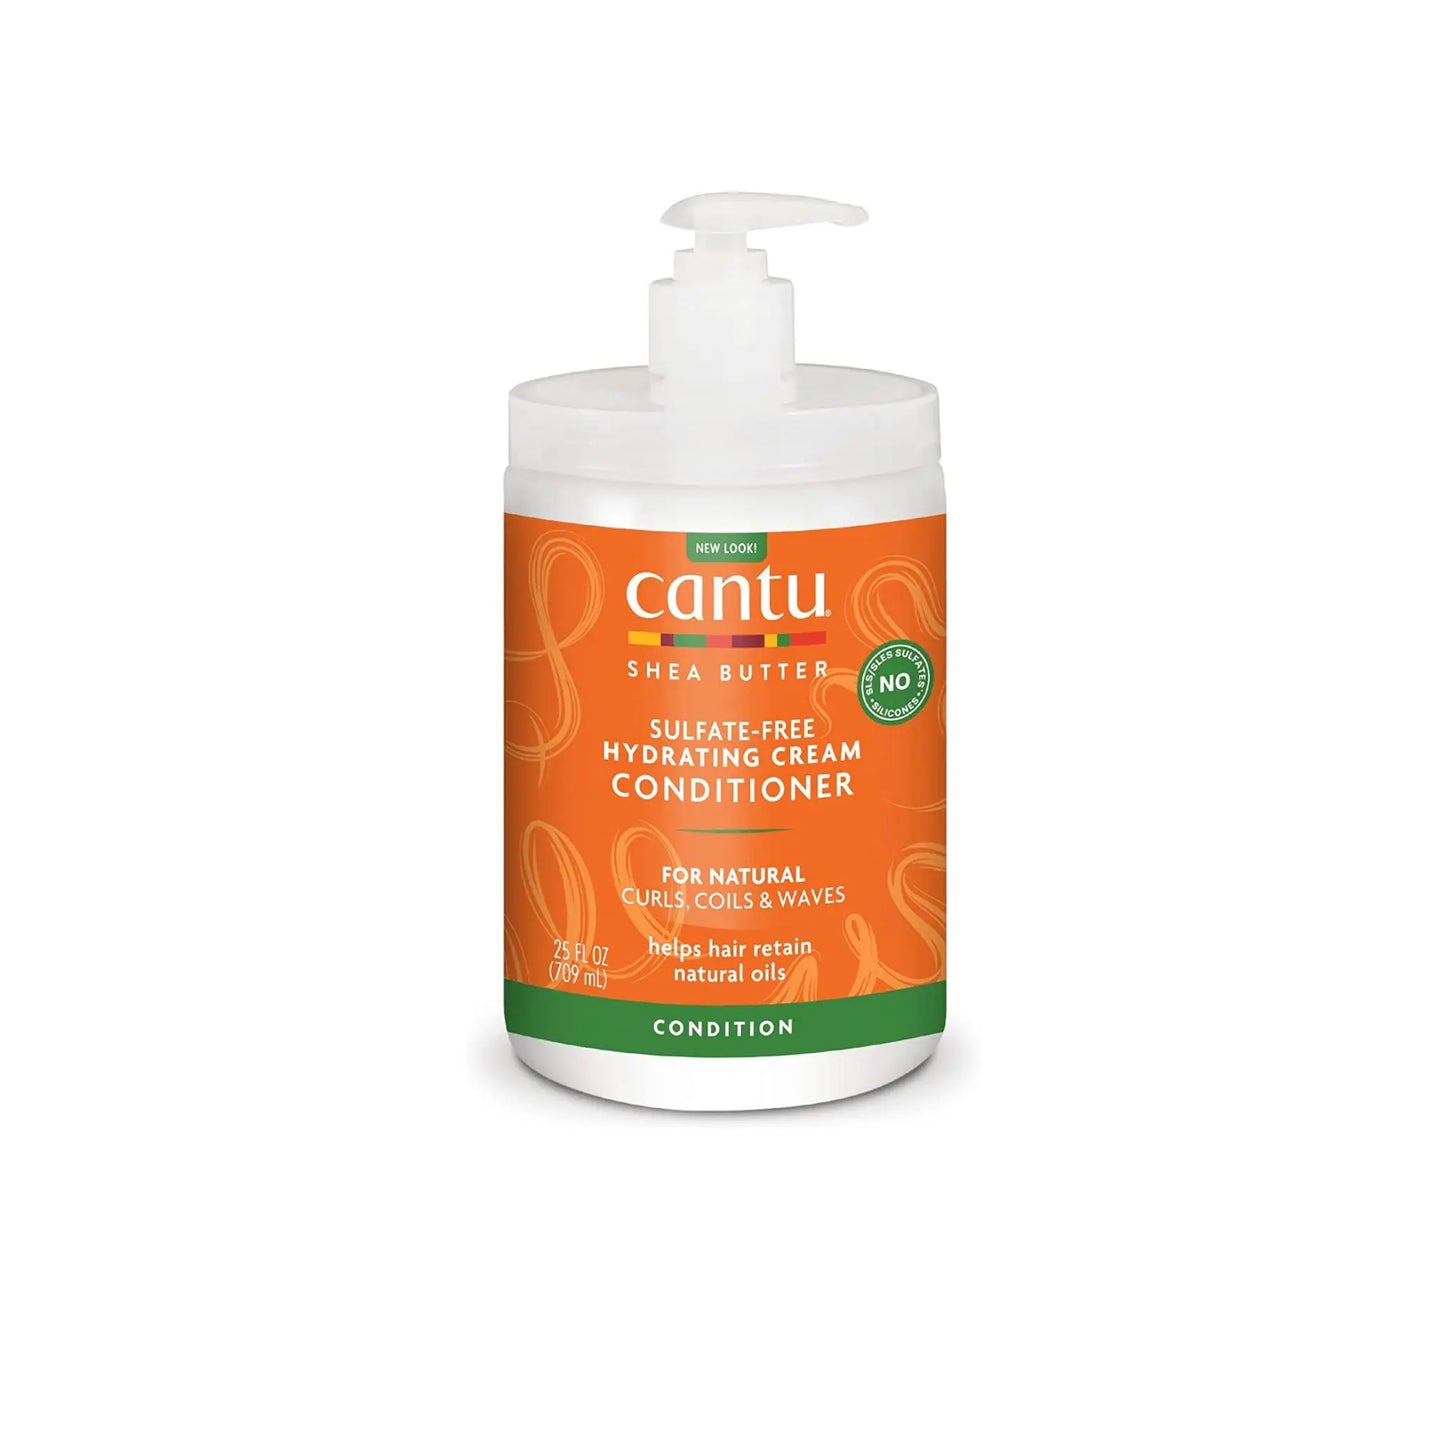 Cantu Shea Butter Natural Hair Hydrating Cream Conditioner